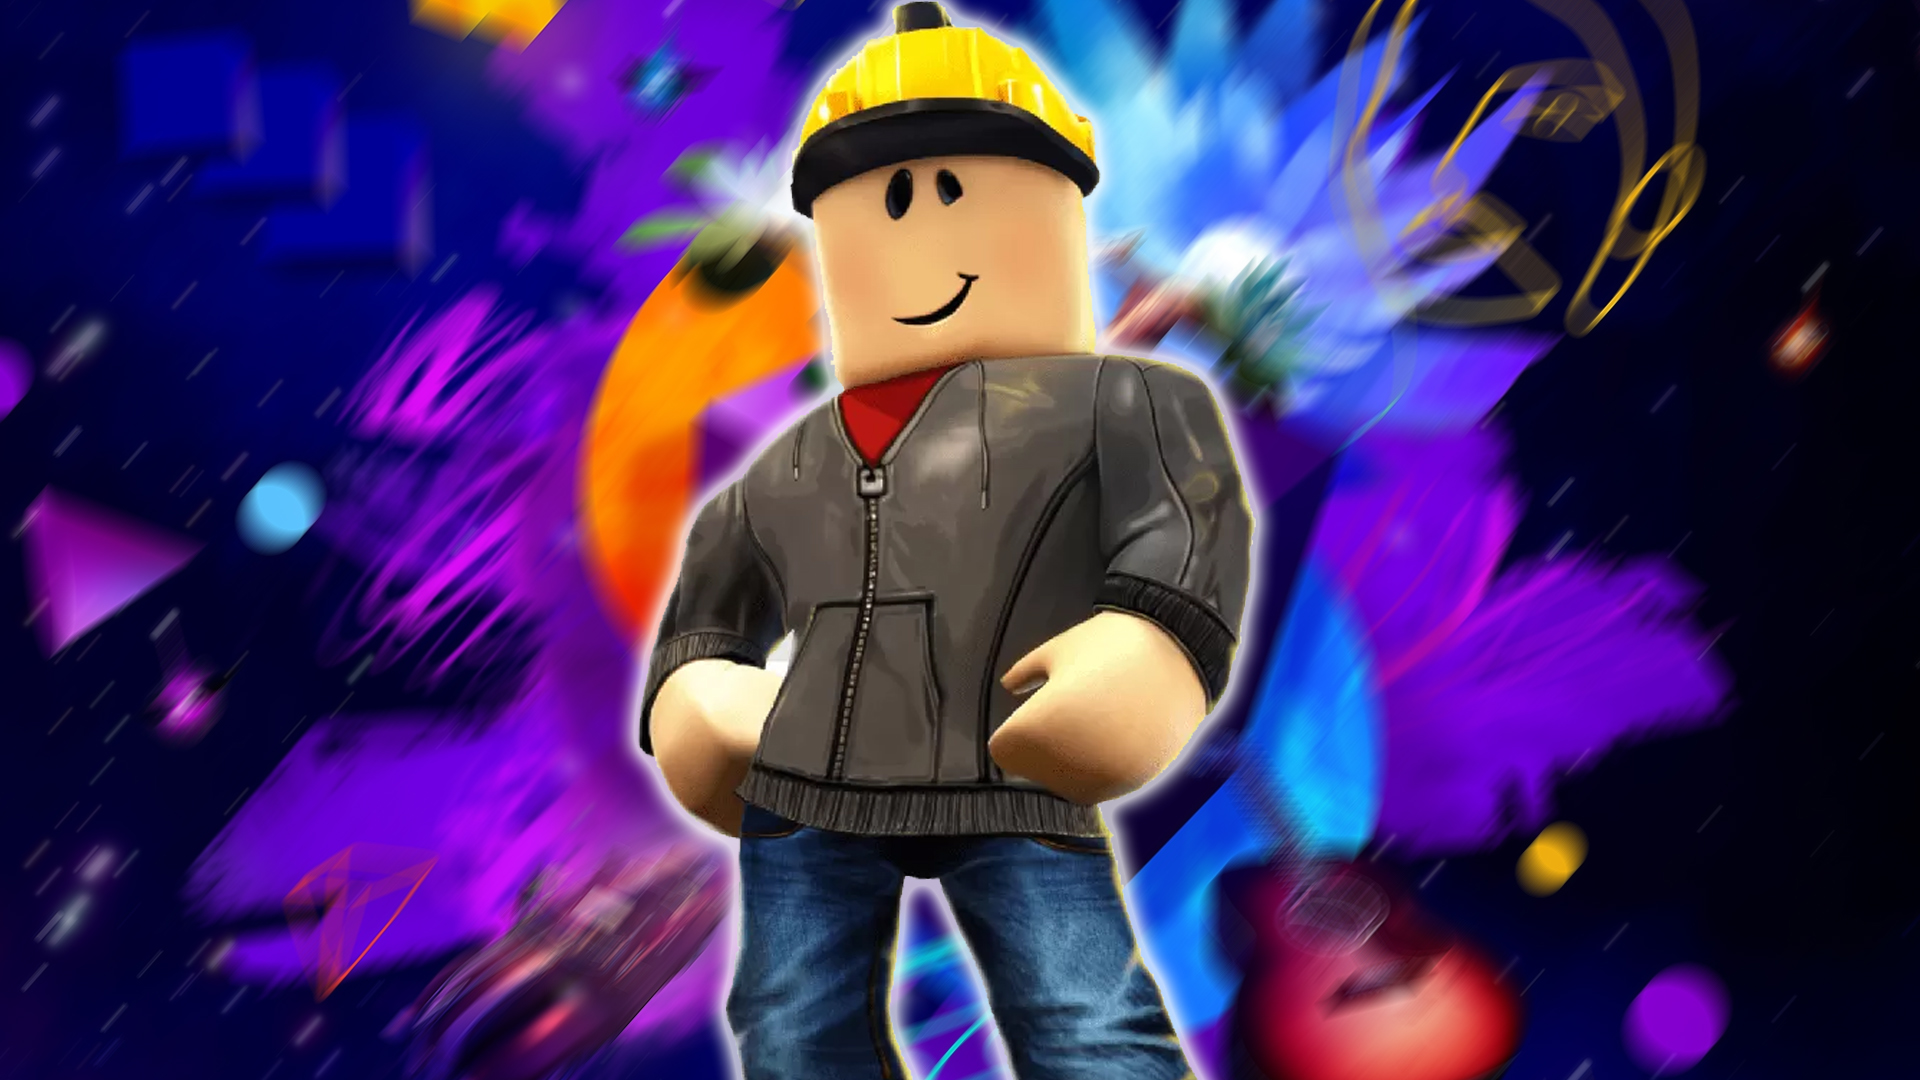 Roblox is on PS store! 